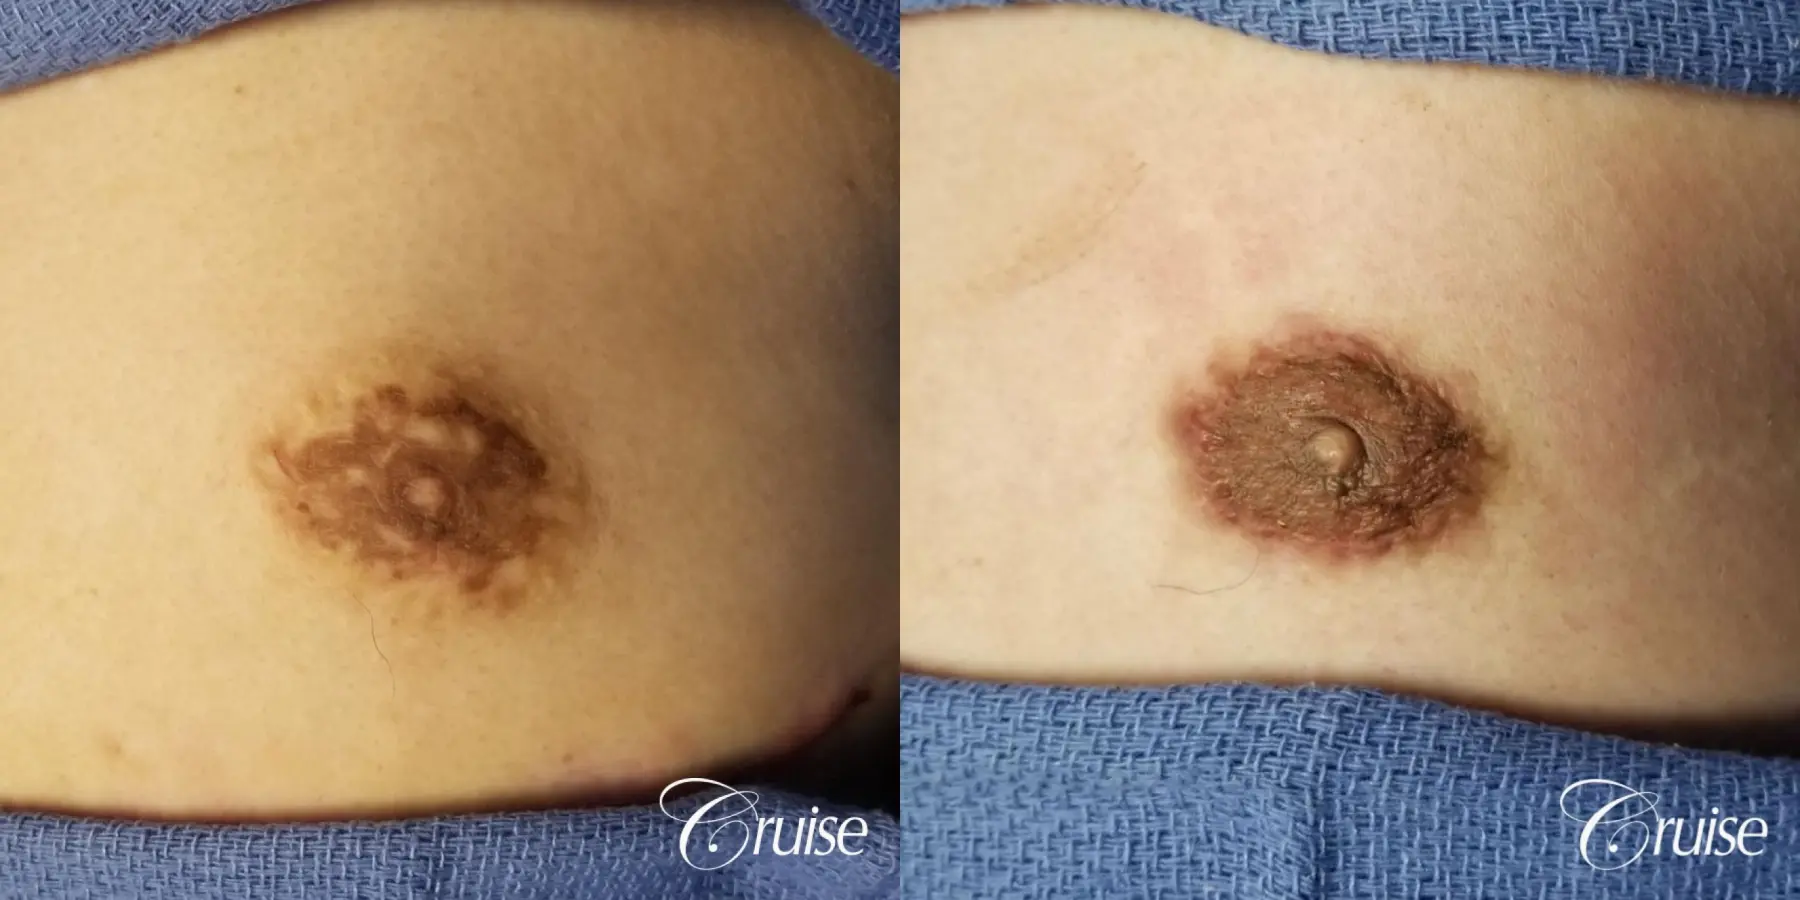 Medical Tattooing: Patient 2 - Before and After  